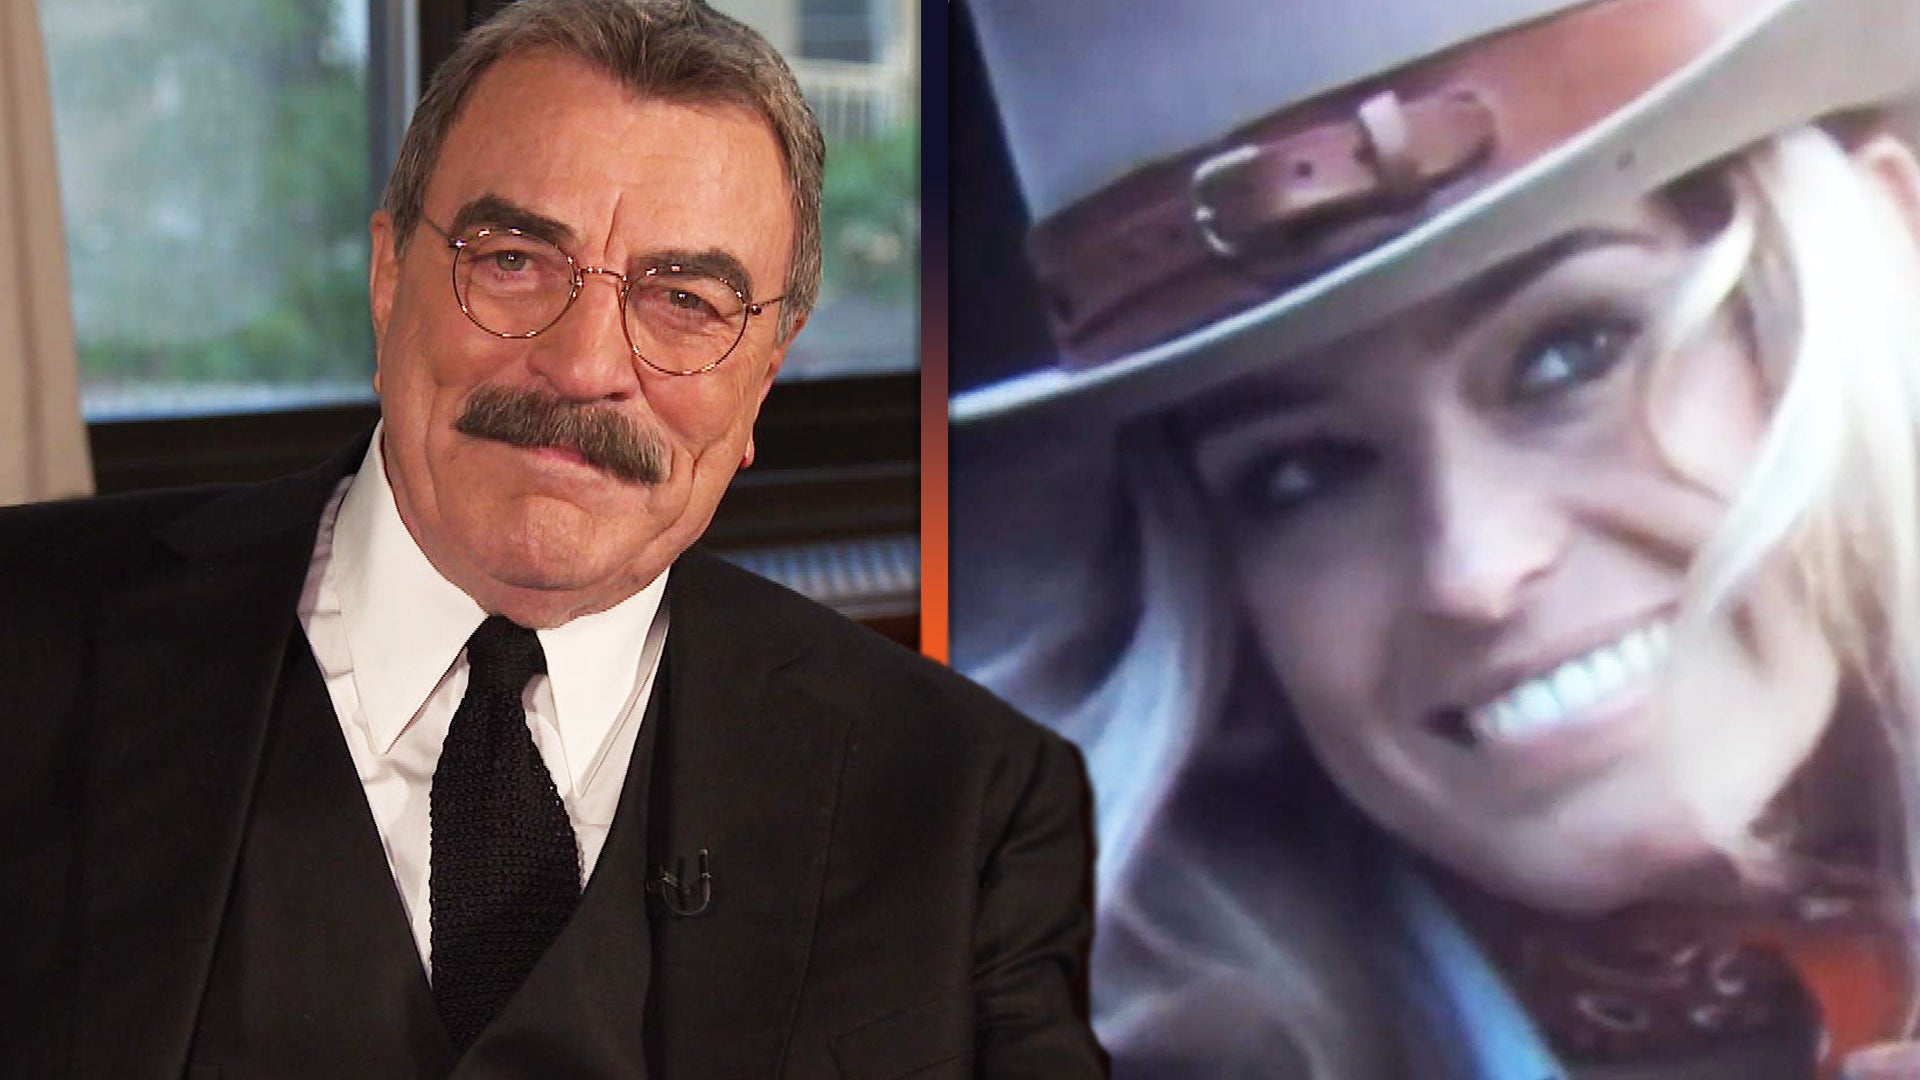 Tom Selleck on Being Discovered Through 'The Dating Game' and Hollywood Memories With Farrah Fawcett